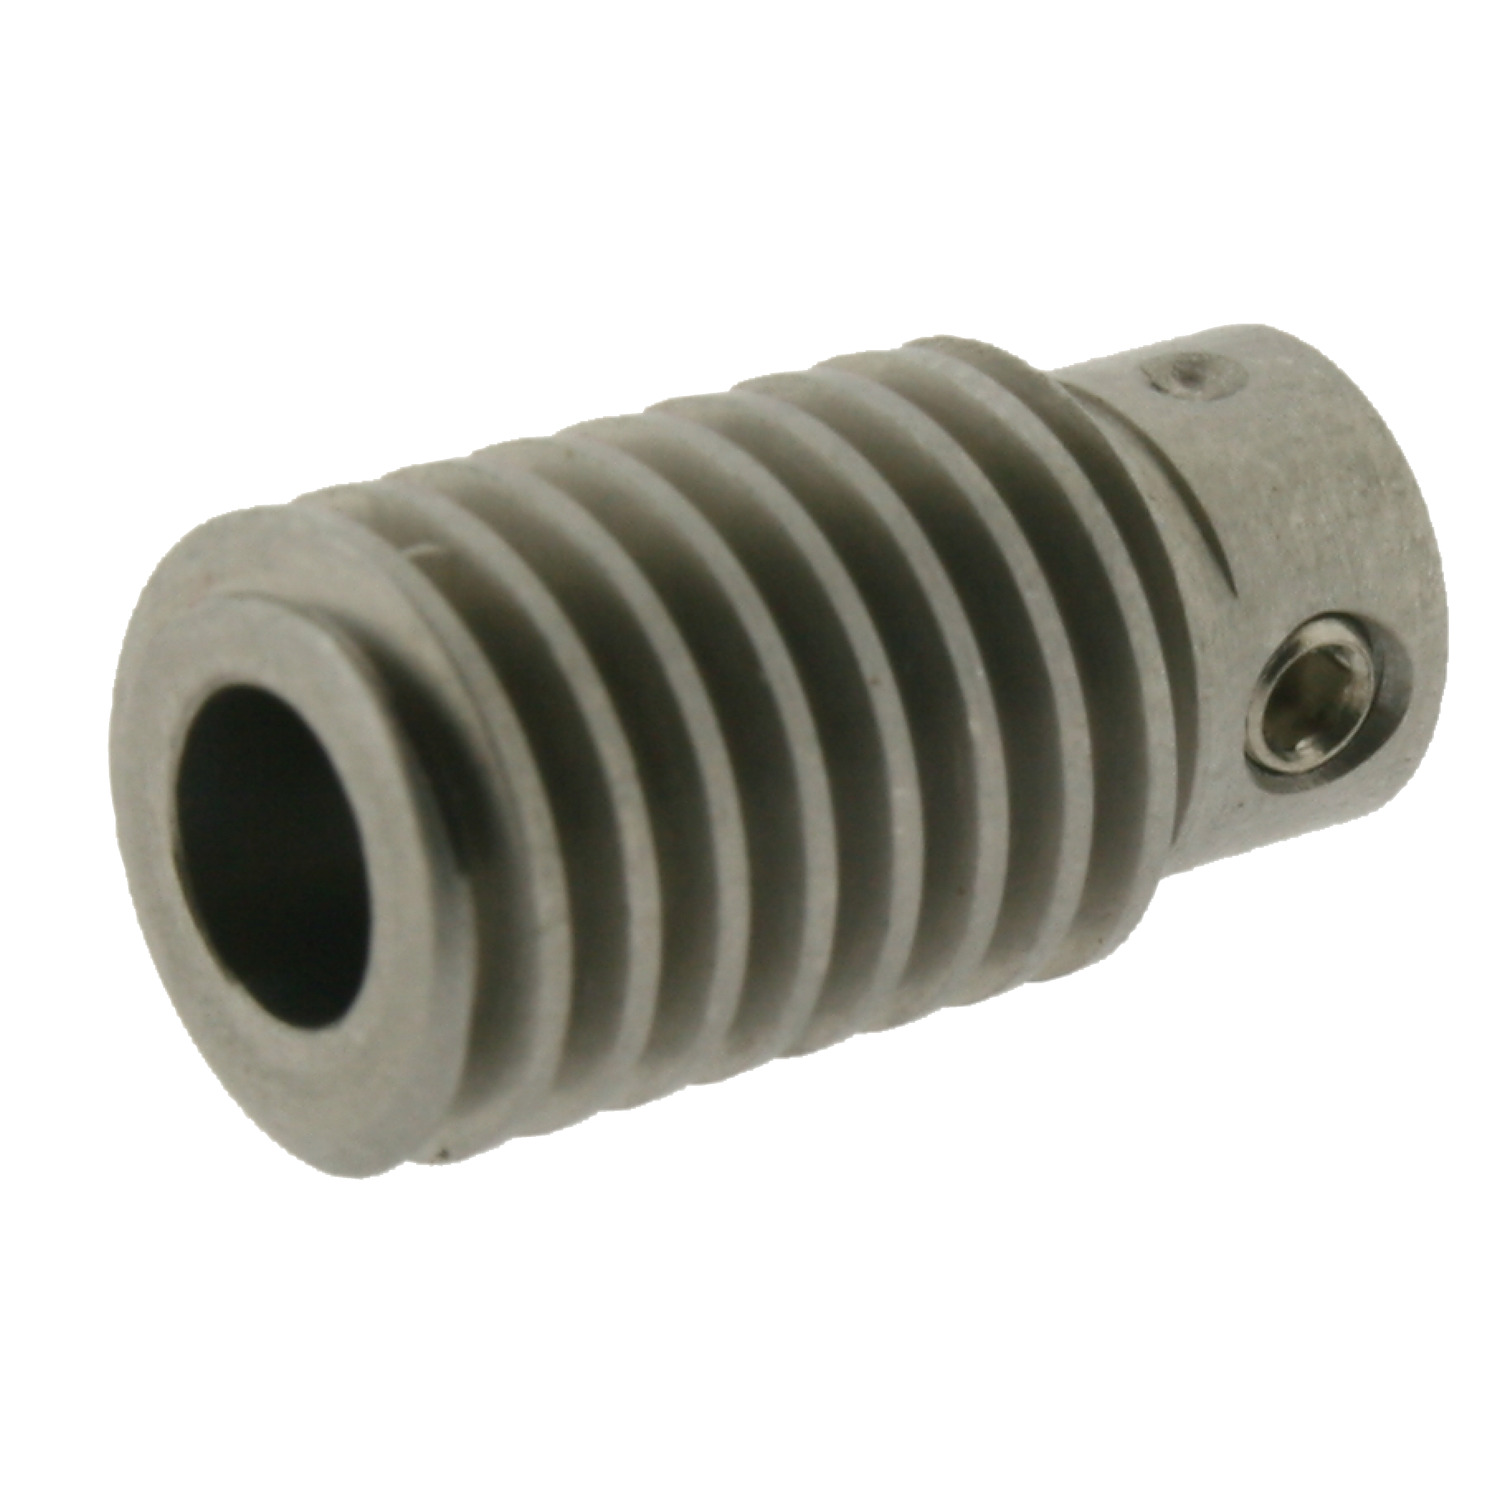 Product R2136, 1,0 Module Precision Worms stainless steel / 